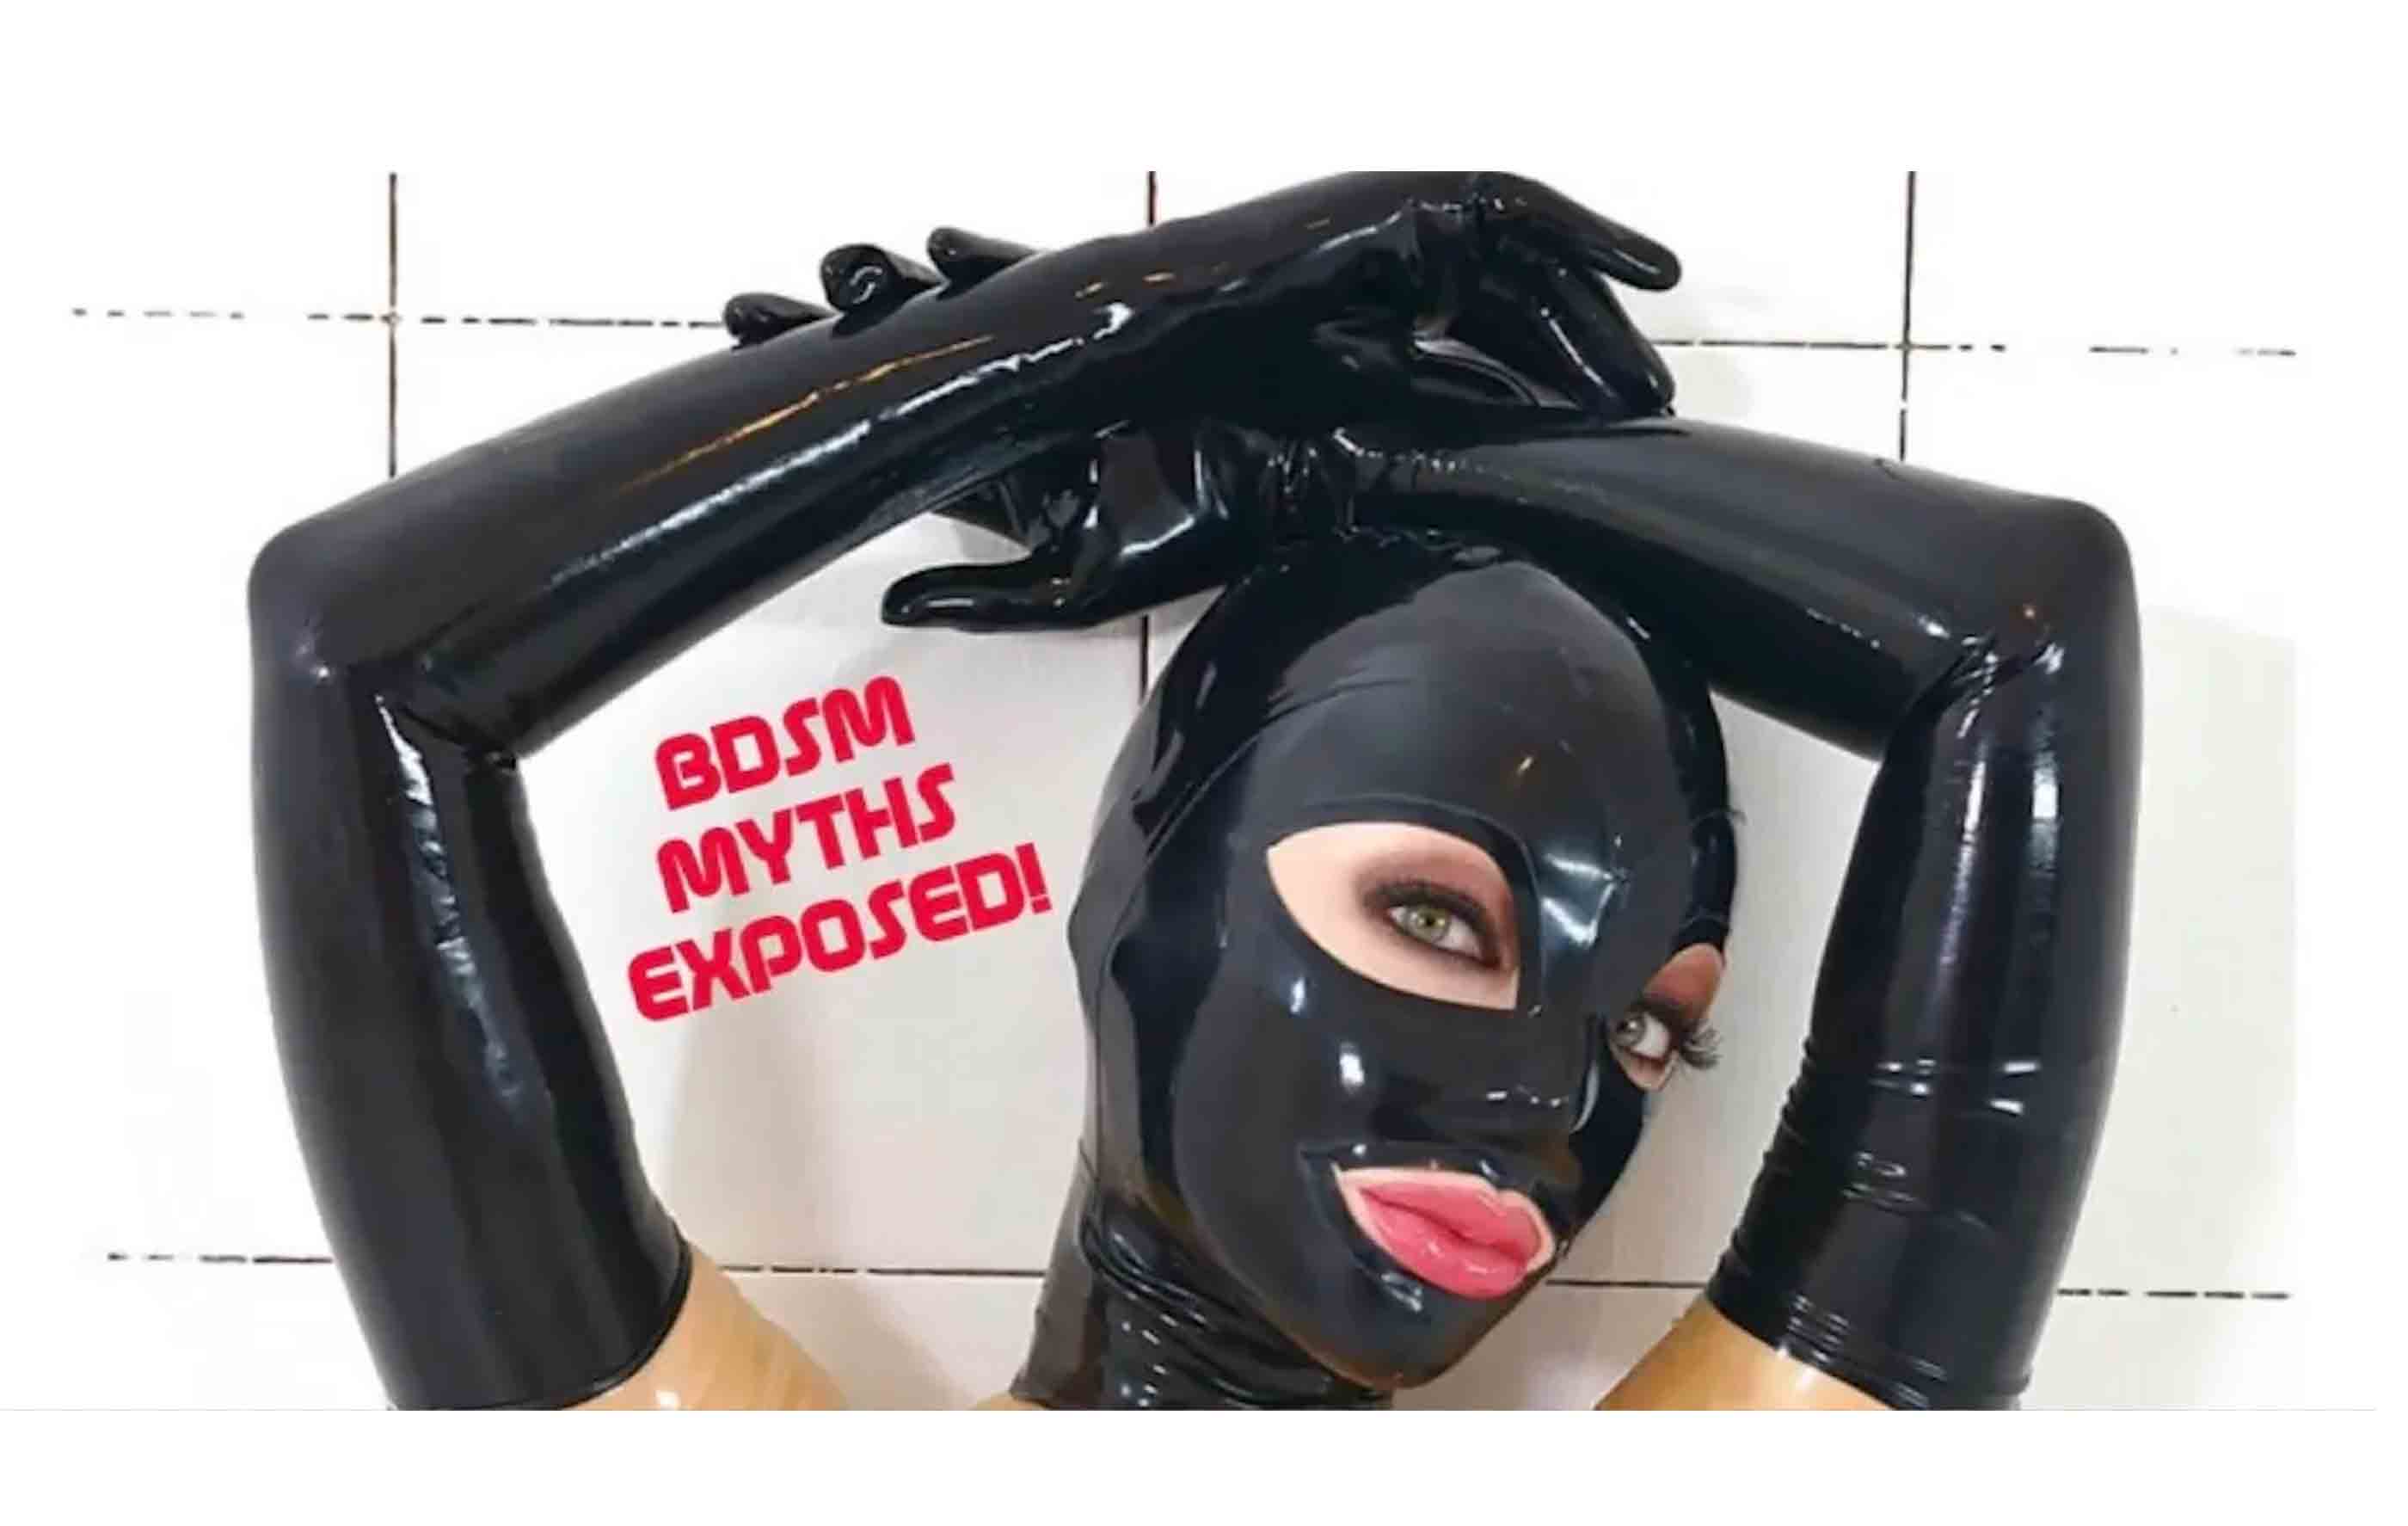 BDSM Myths Exposed with the Help of Adultys.com